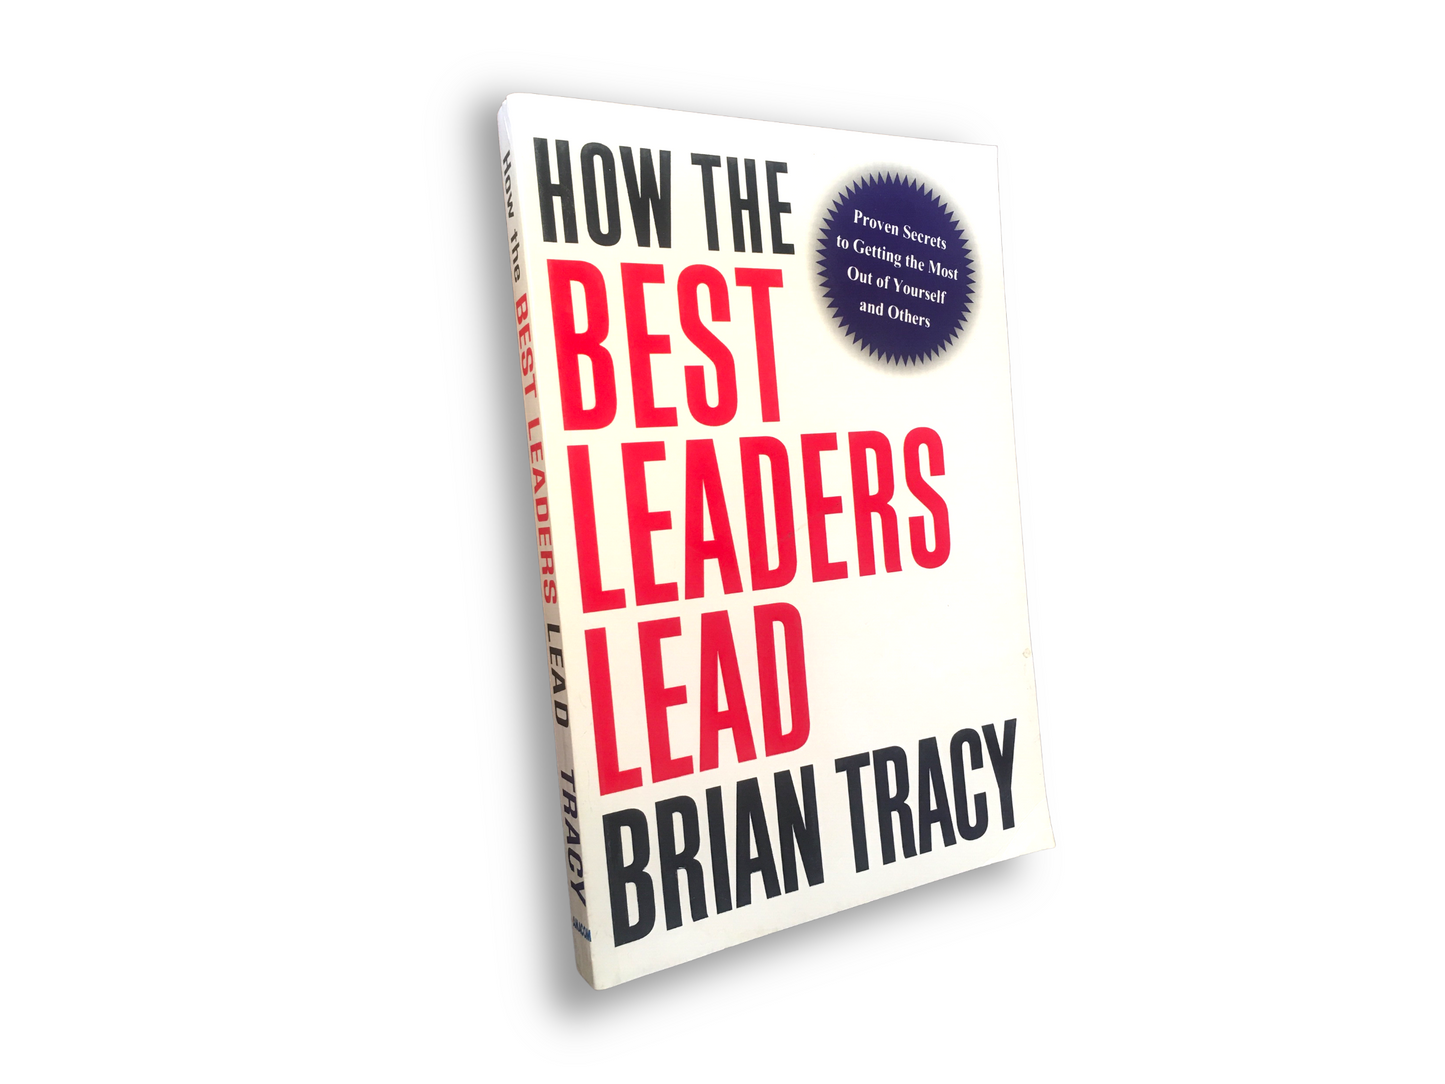 HOW THE BEST LEADER LEAD